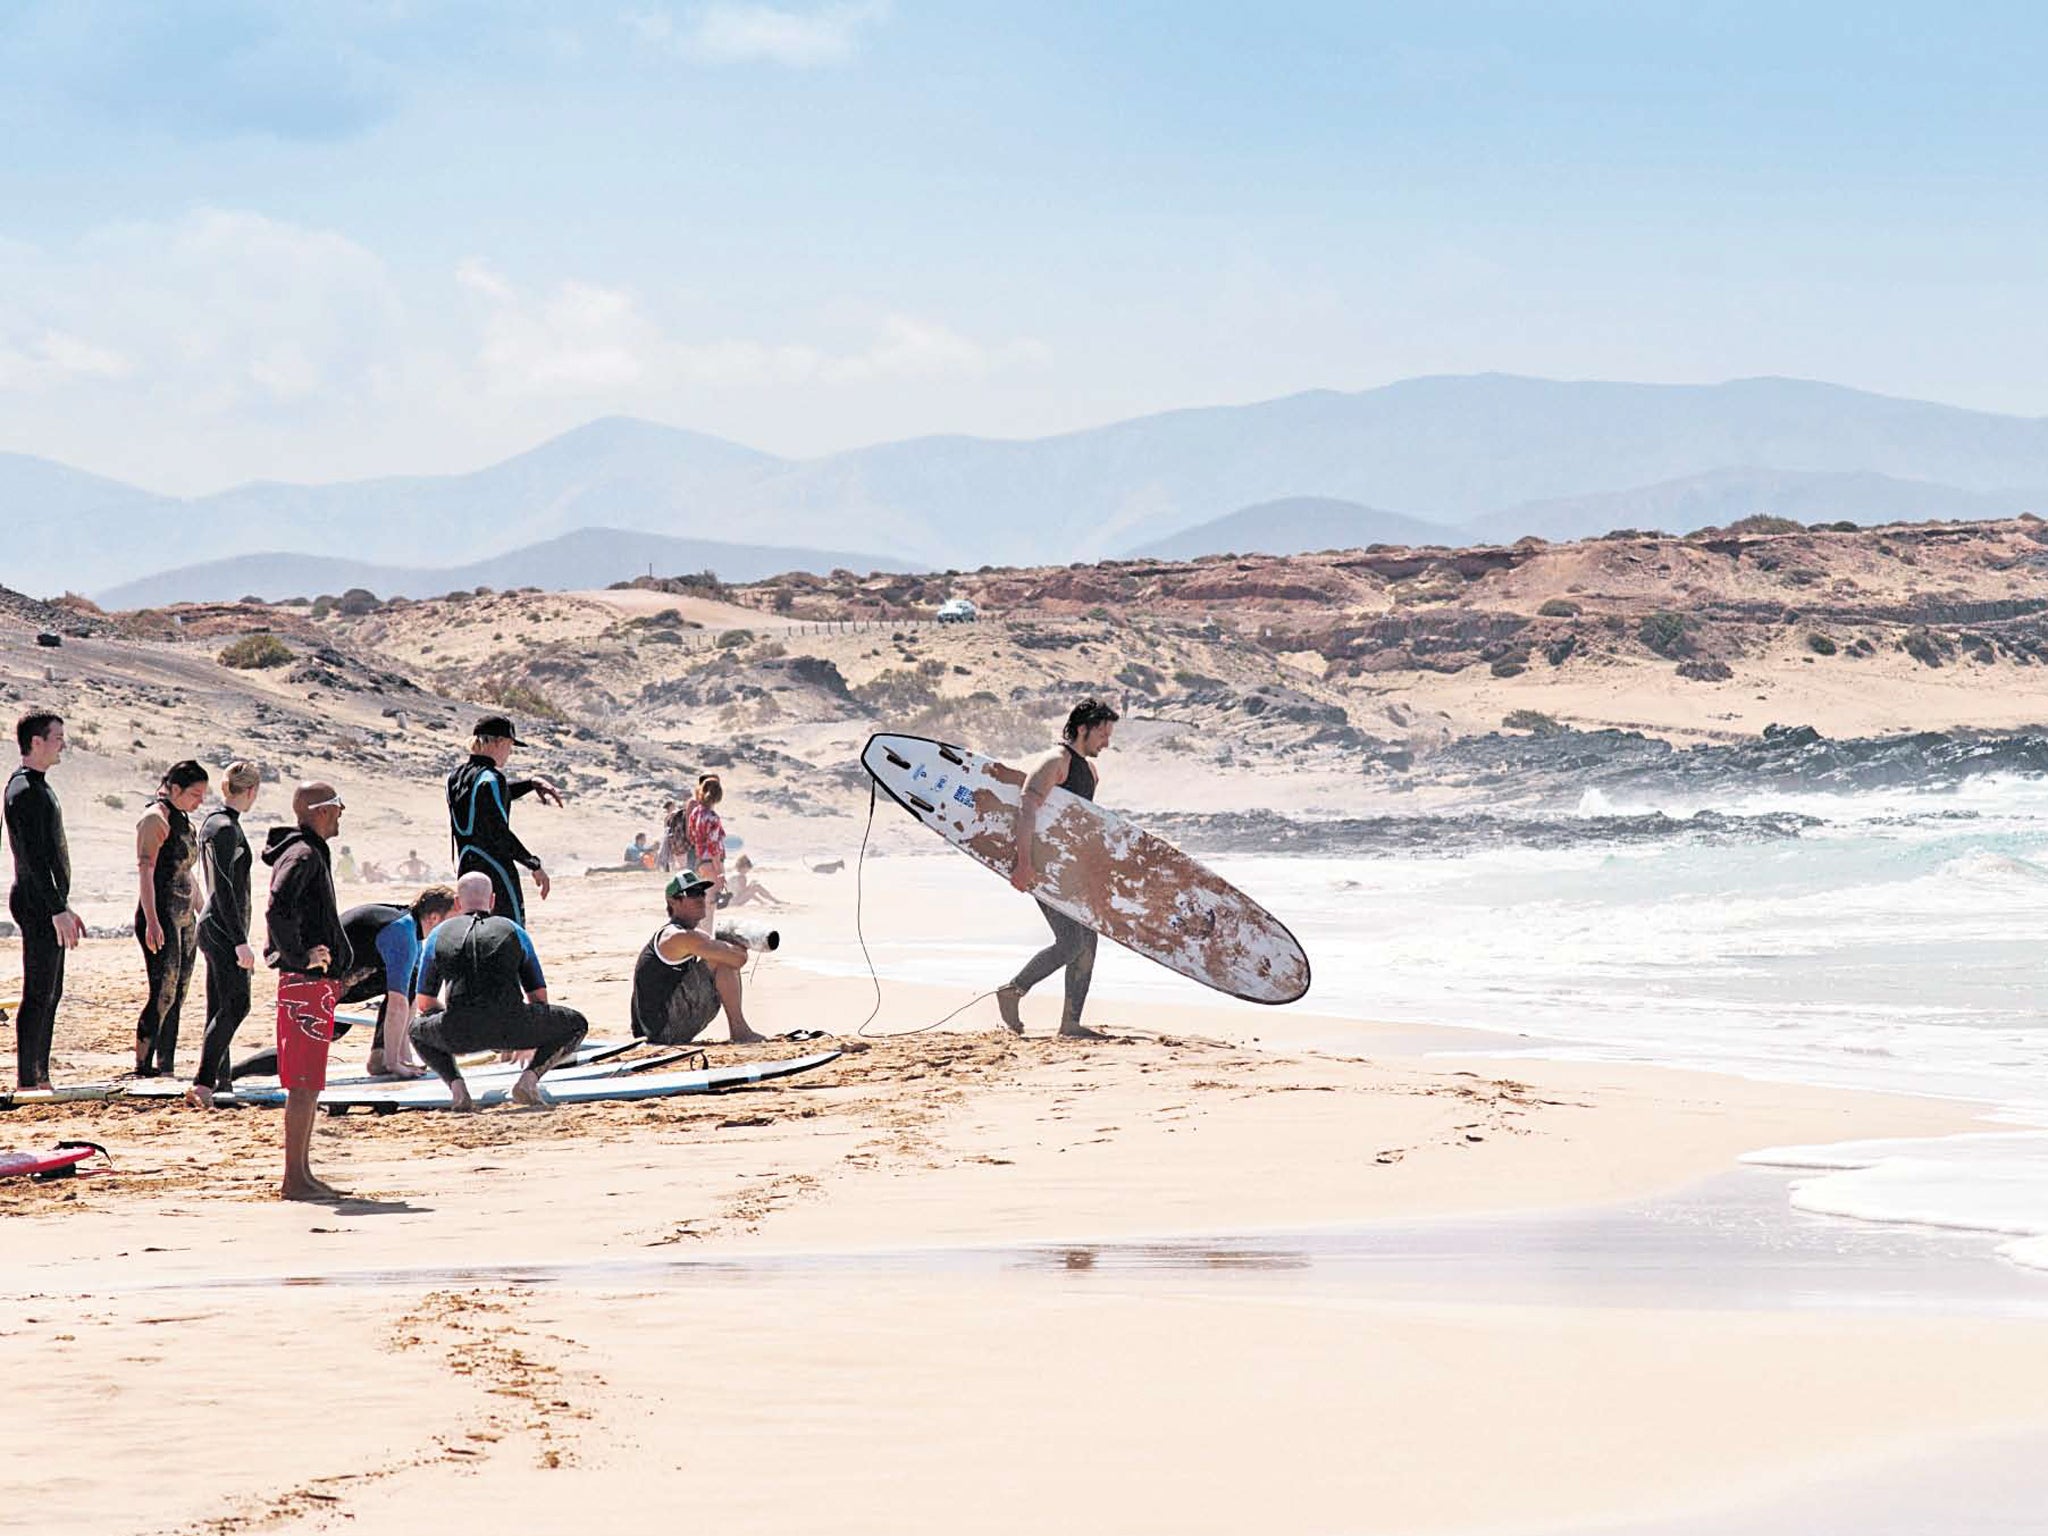 All aboard: surfers prepare to ride the waves at Playa Cotillo